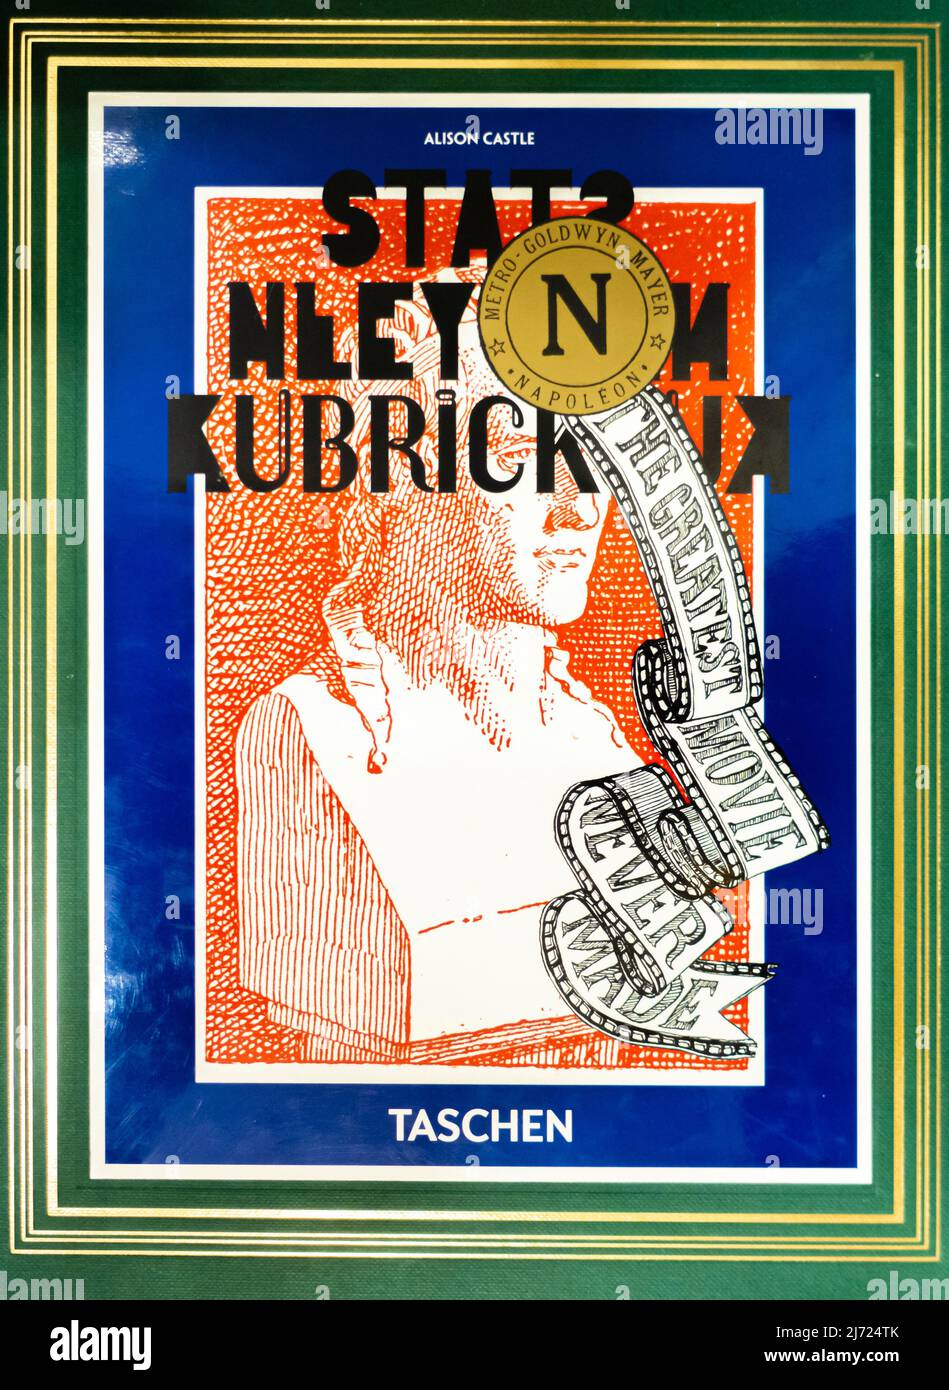 Stanley Kubrick’s “Napoleon”. The Greatest Movie Never Made - Taschen edition - 2009 - by Alison Castle Stock Photo